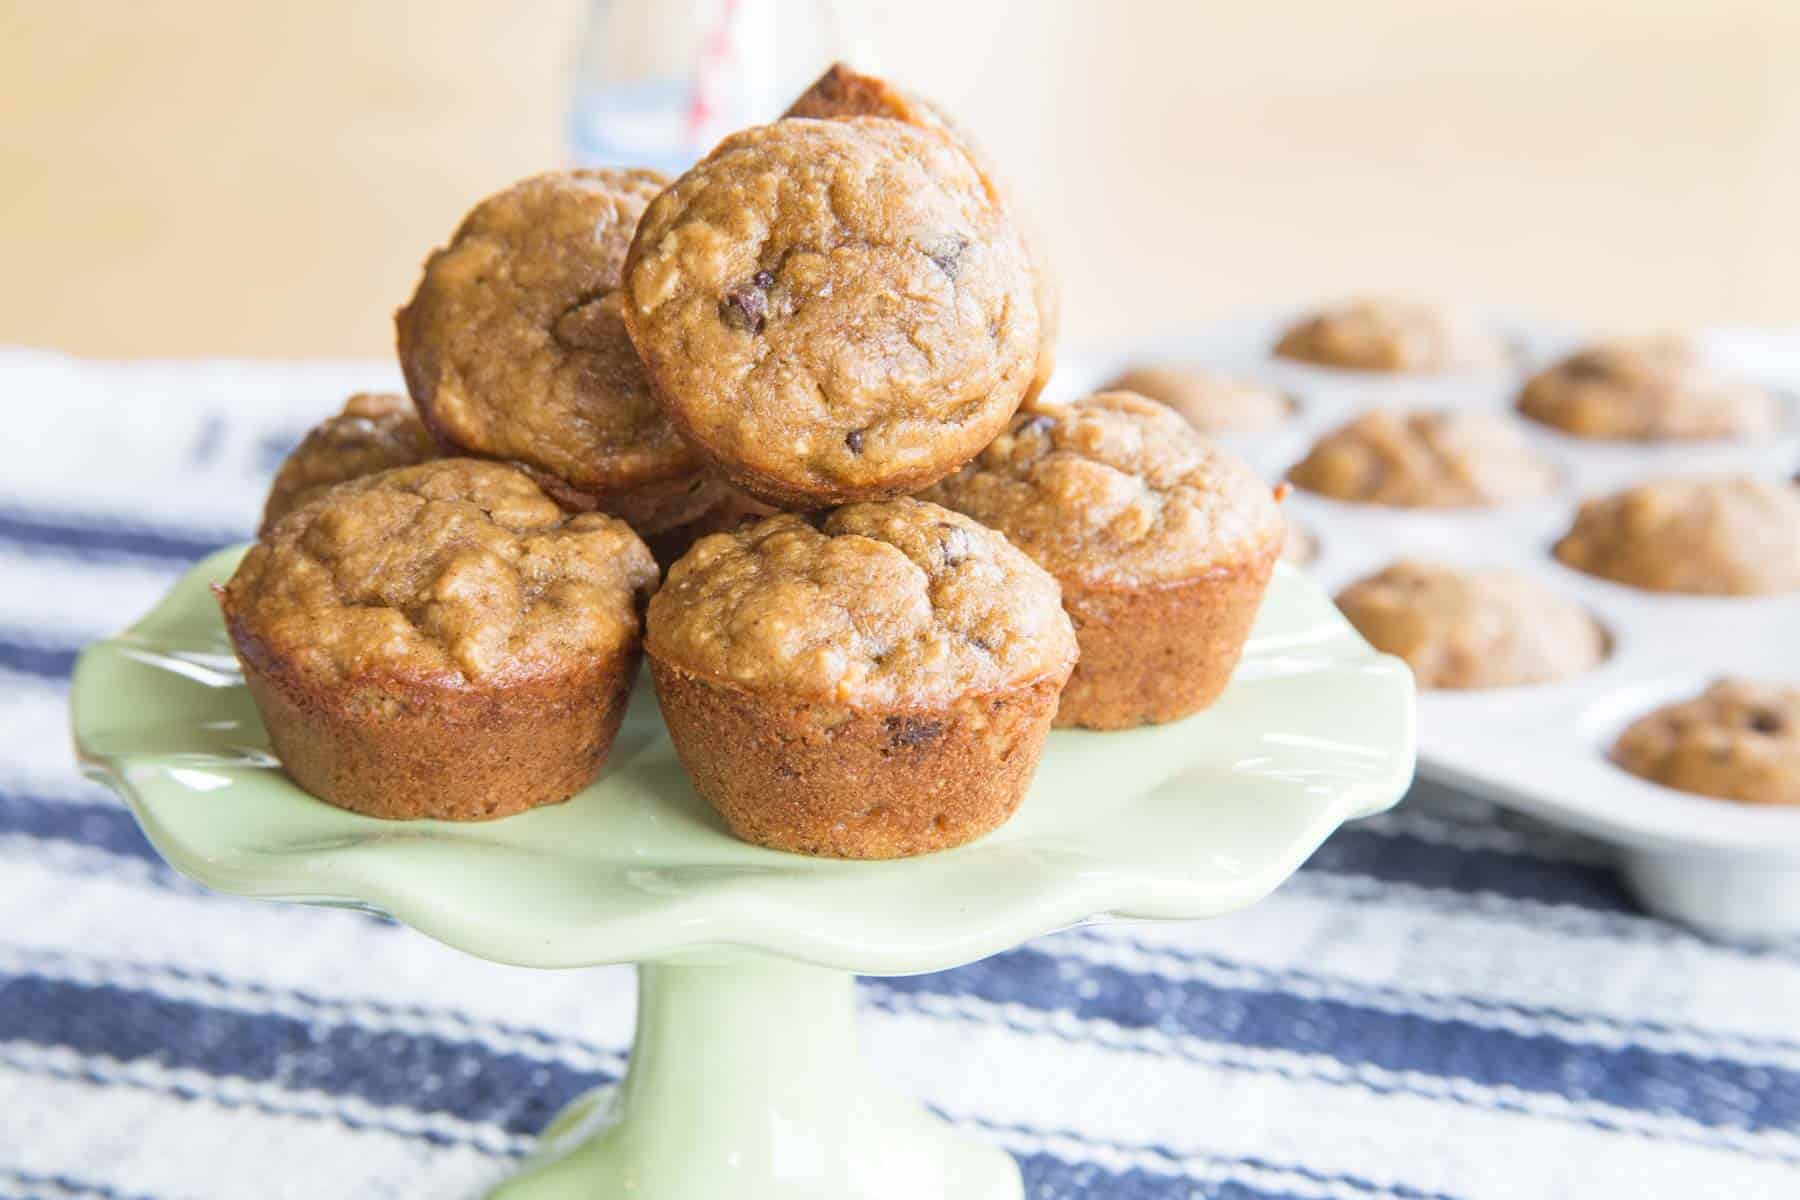 Gluten Free Peanut Butter Banana Muffins piled on a small cake stand with more mini muffins in a muffin pan in the background.